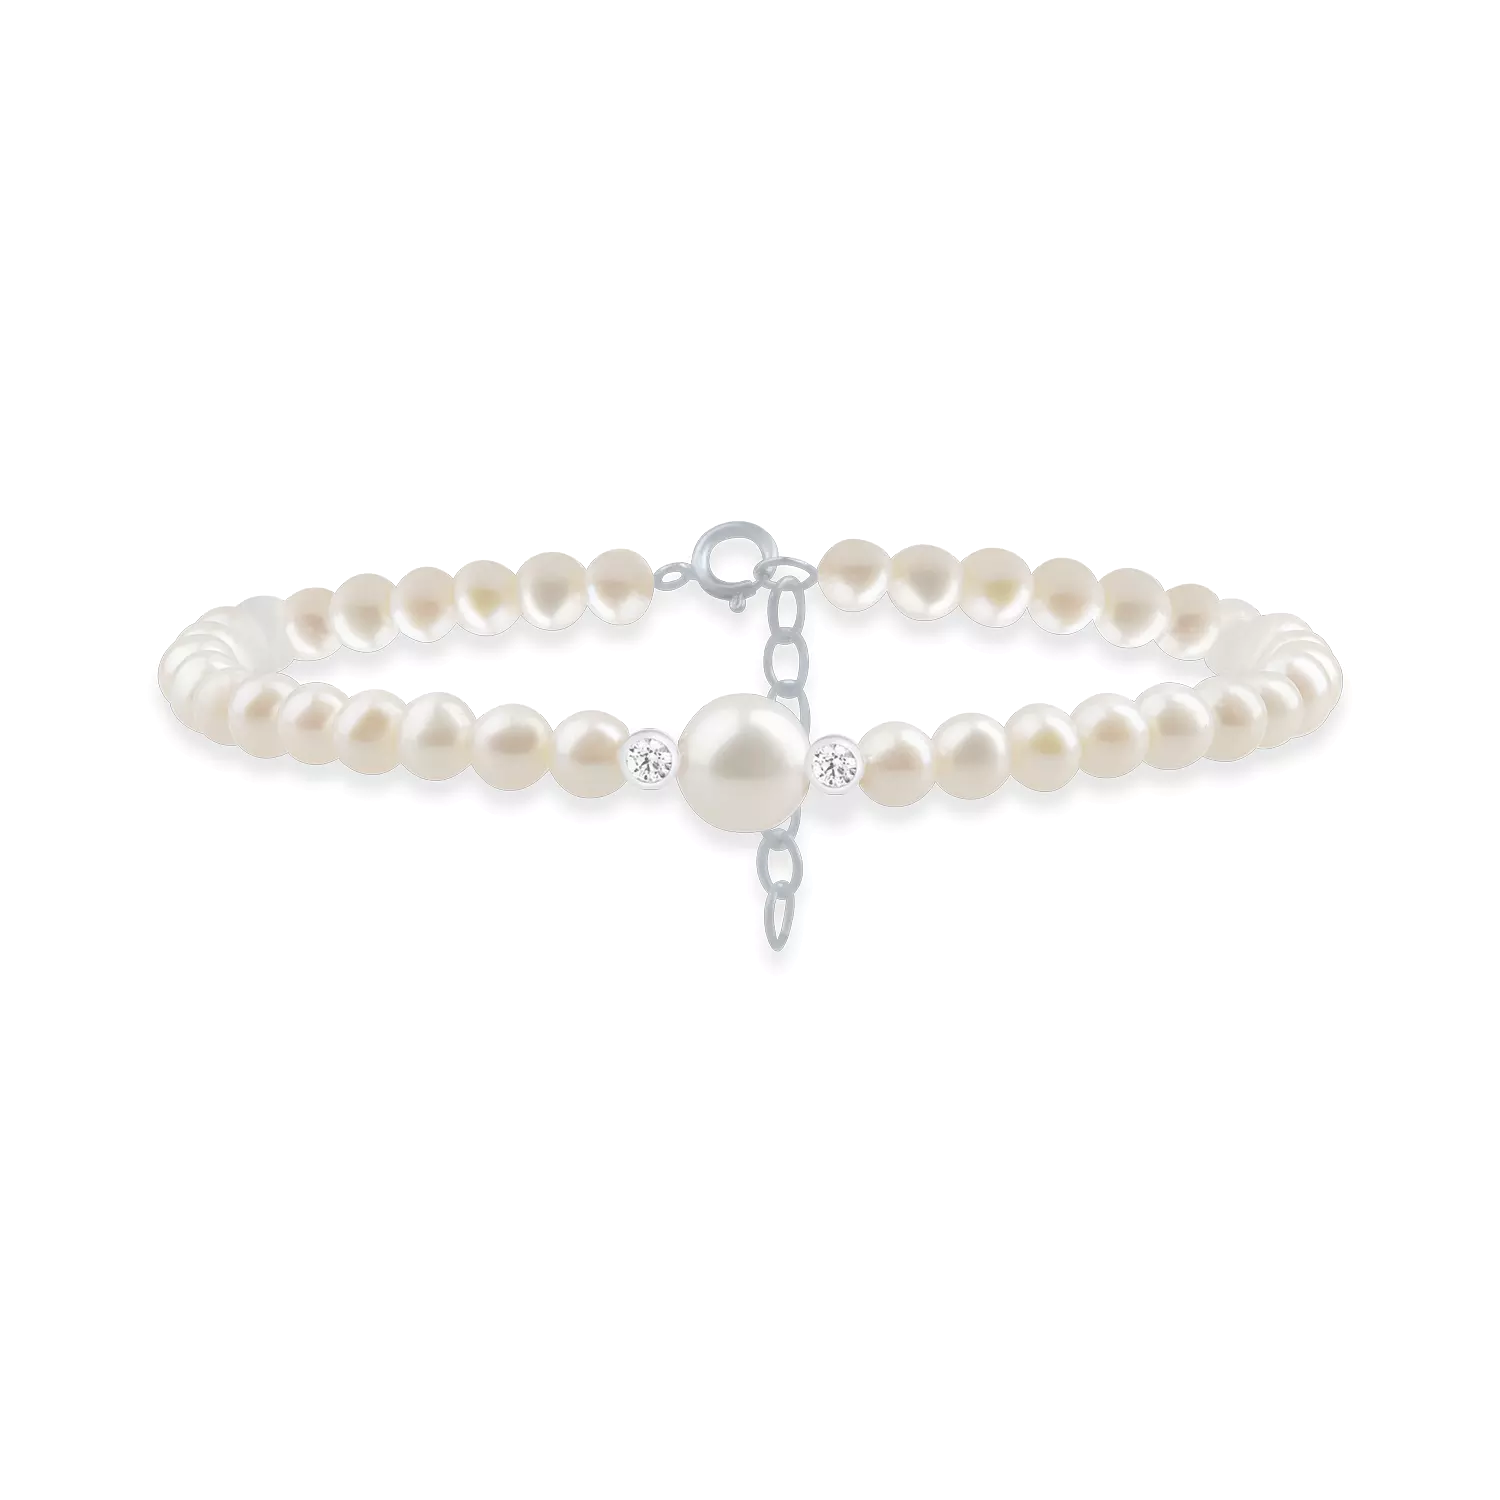 White gold bracelet with 20.89ct fresh water pearls